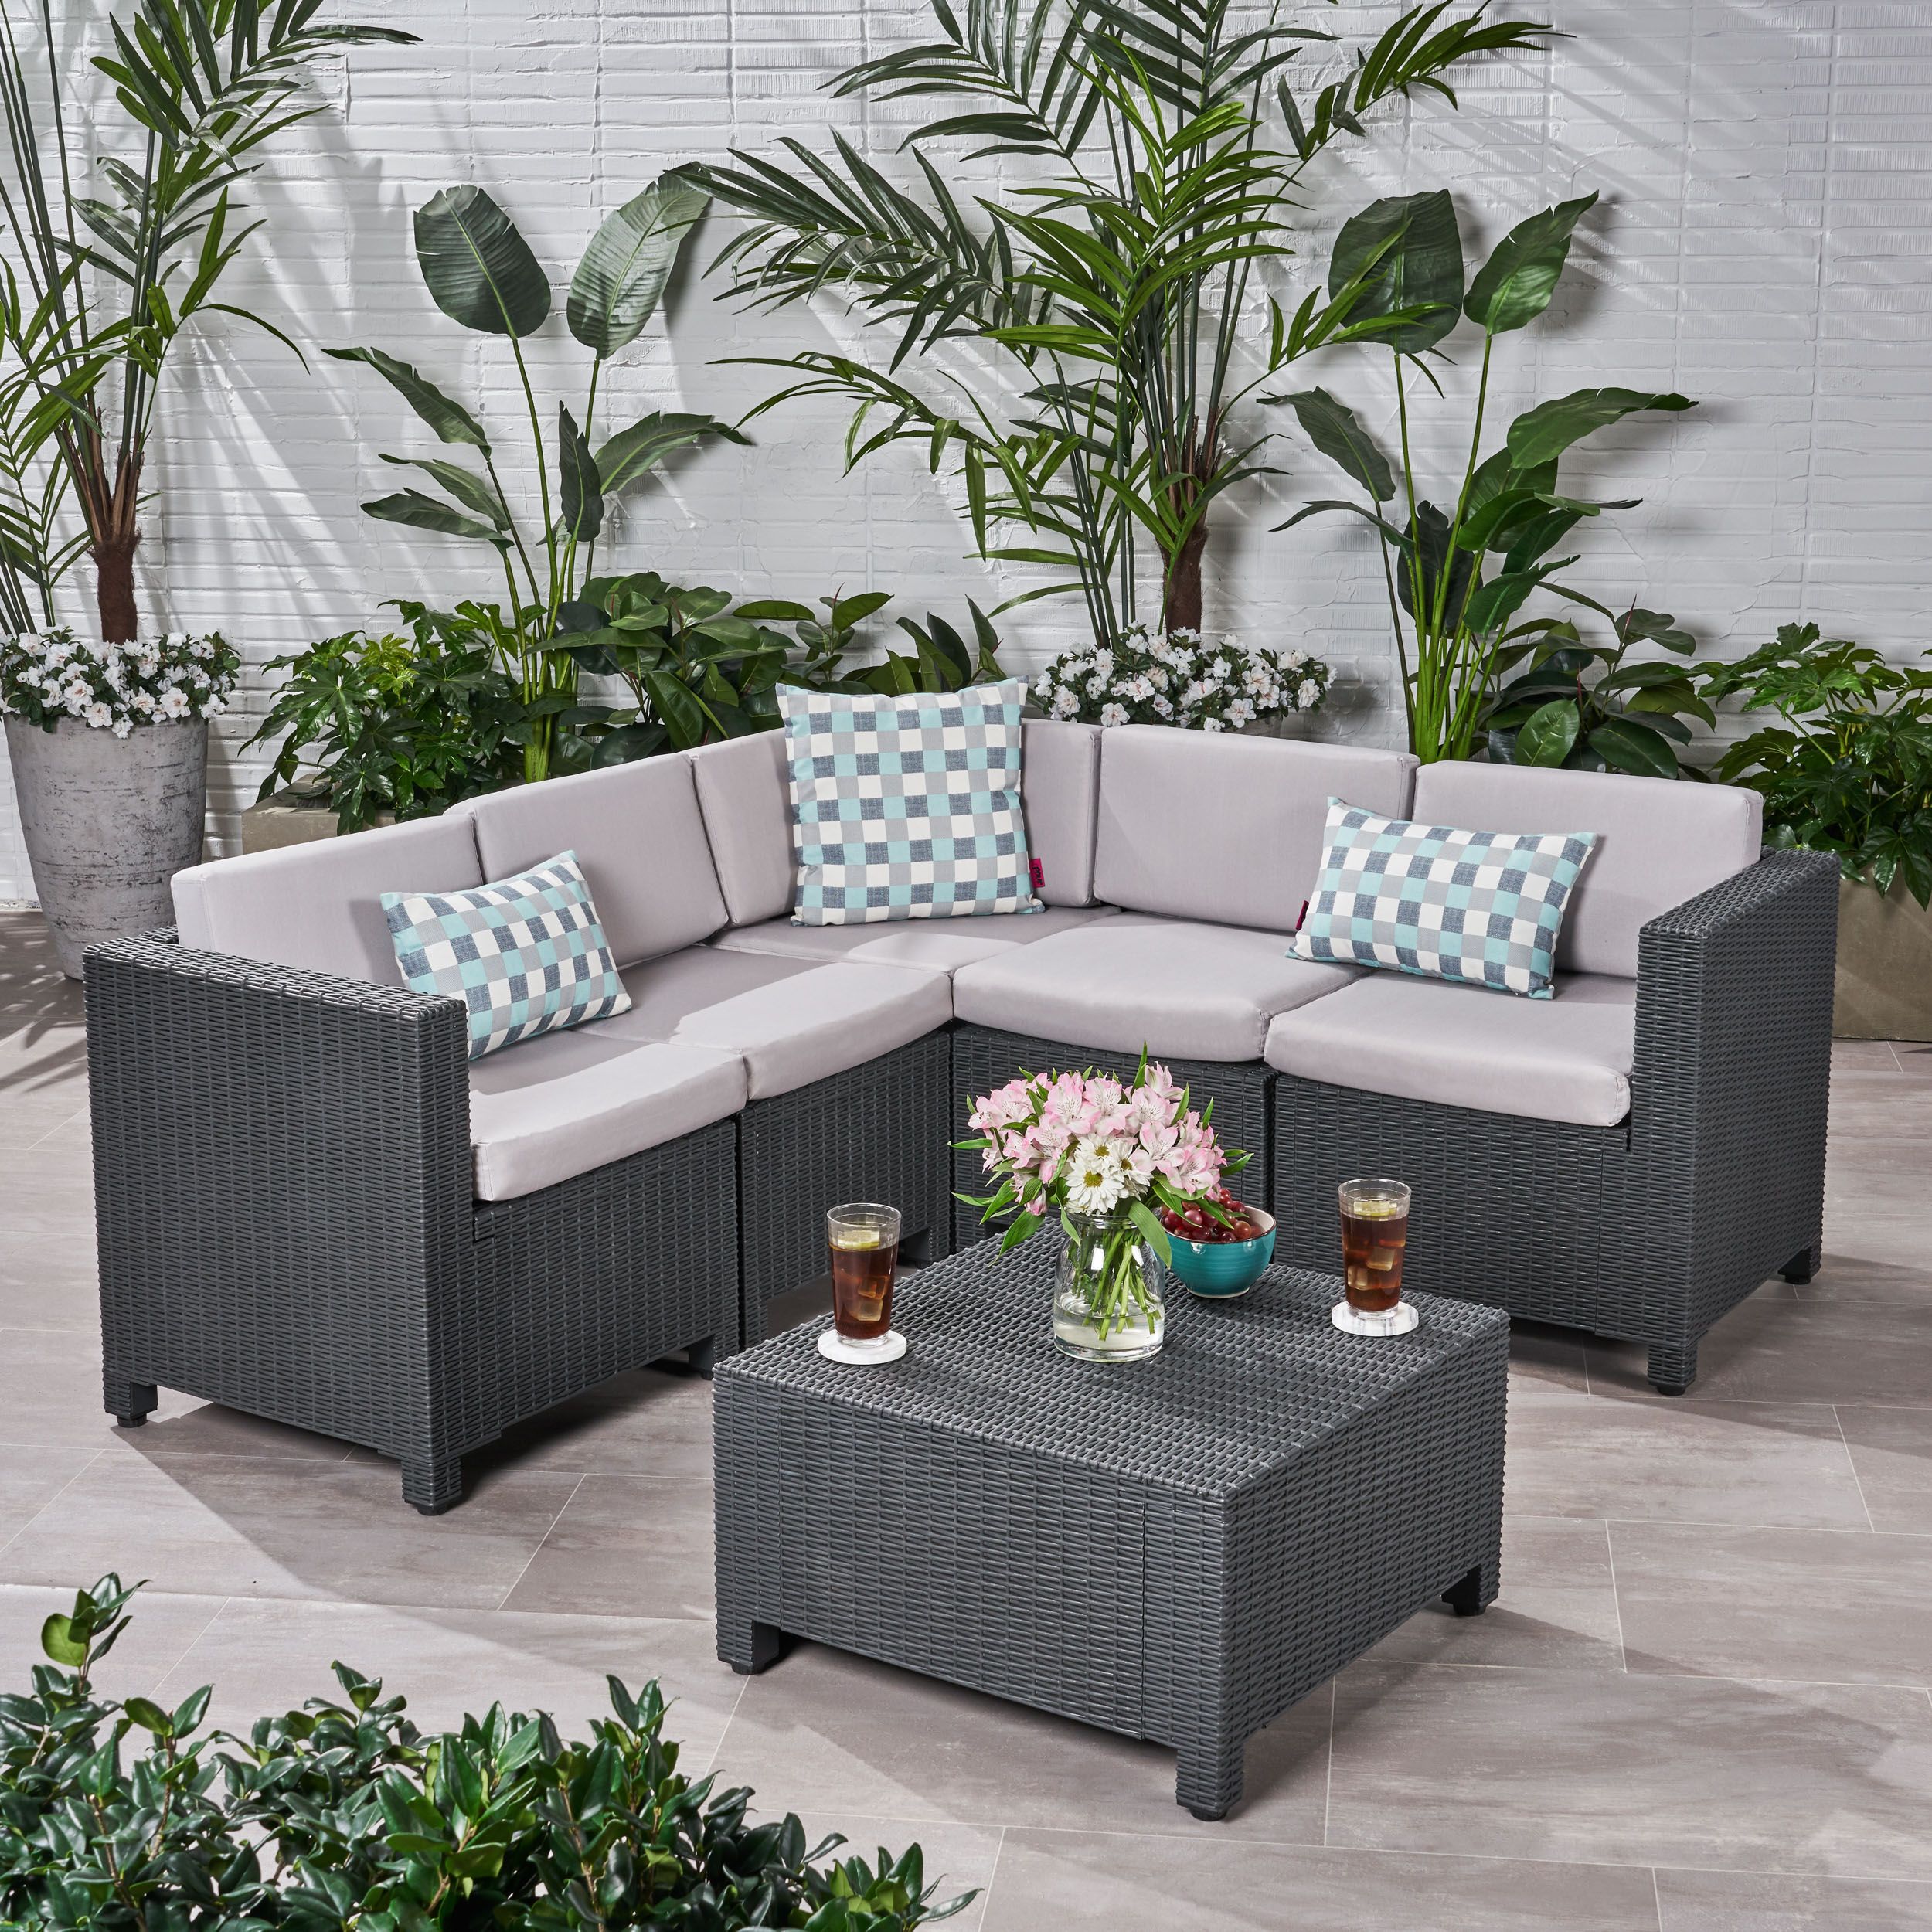 Primrose Outdoor All Weather Faux Wicker 5 Seater Sectional Sofa Set For Gray All Weather Outdoor Seating Patio Sets (View 5 of 15)